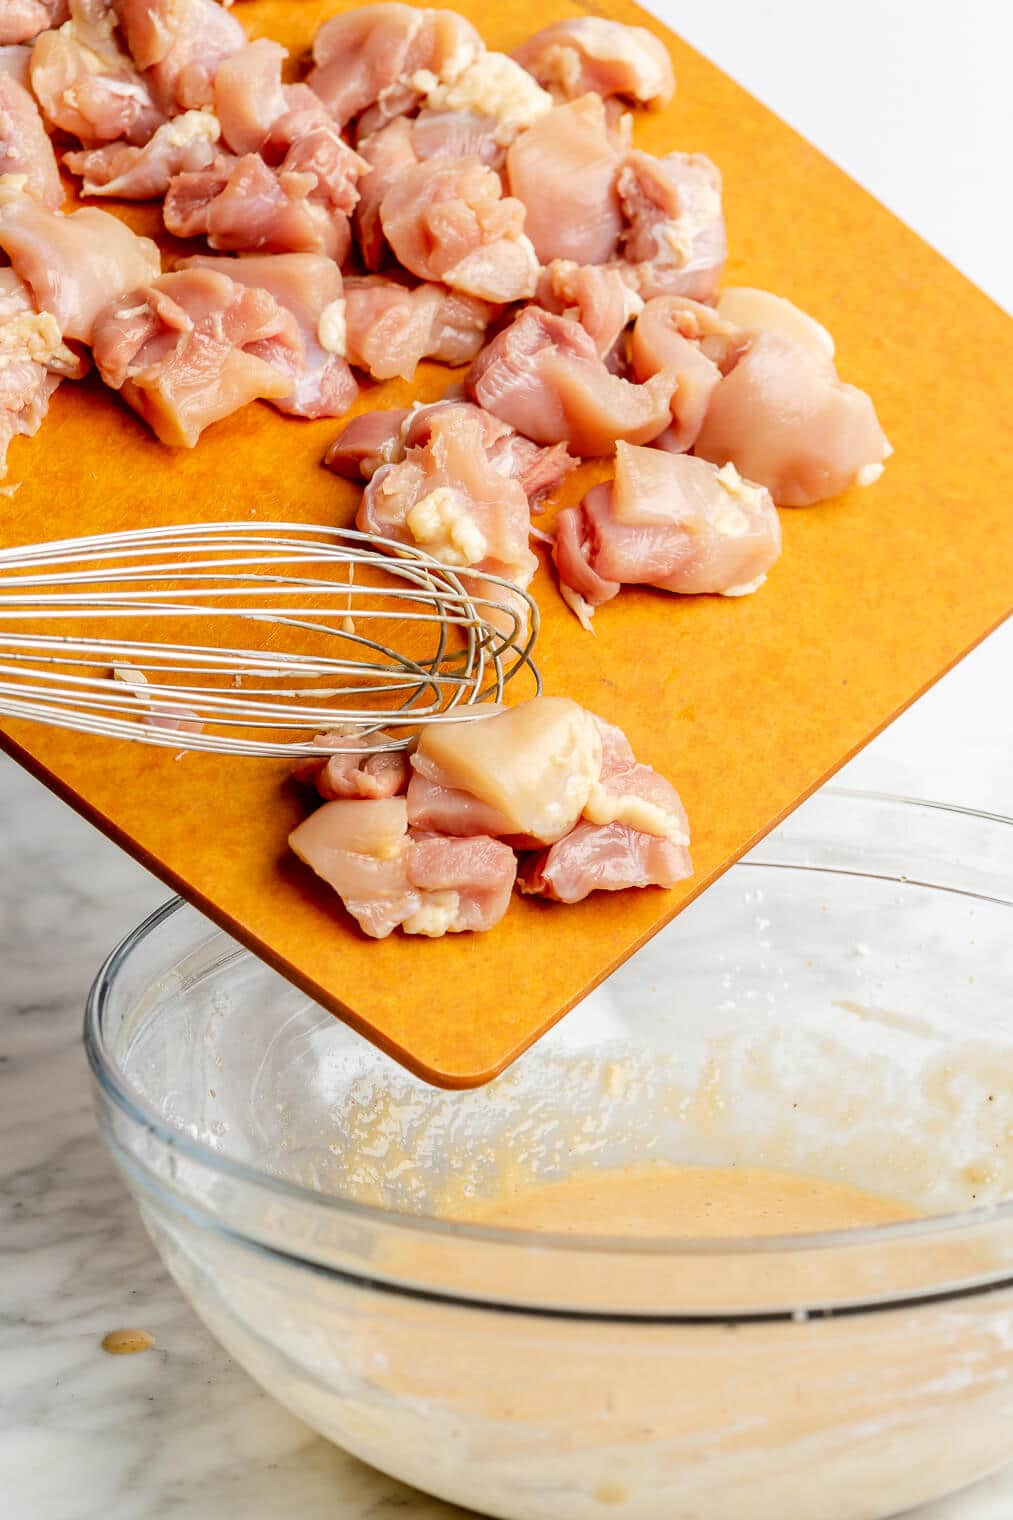 A person using a small whisk to guide chopped chicken thighs into a large glass bowl of whisked egg white, arrowroot starch, coconut aminos, apple cider vinegar, and salt.